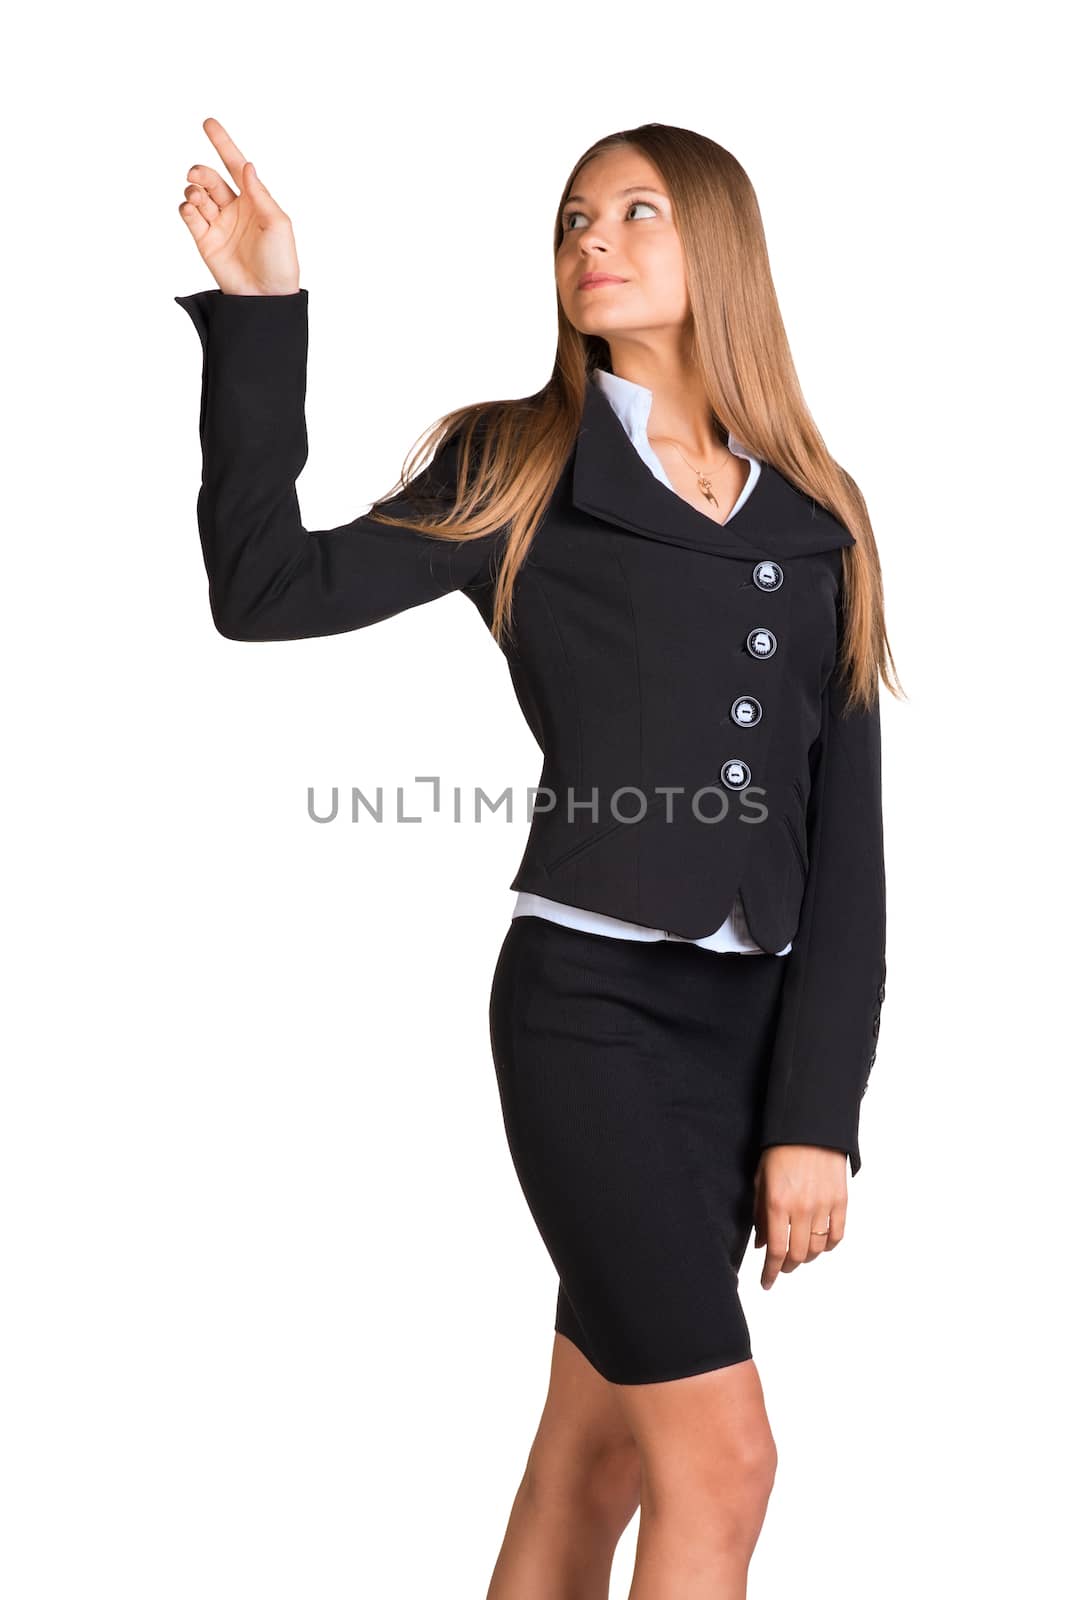 Businesswoman pointing her finger upward. Isolated on white background